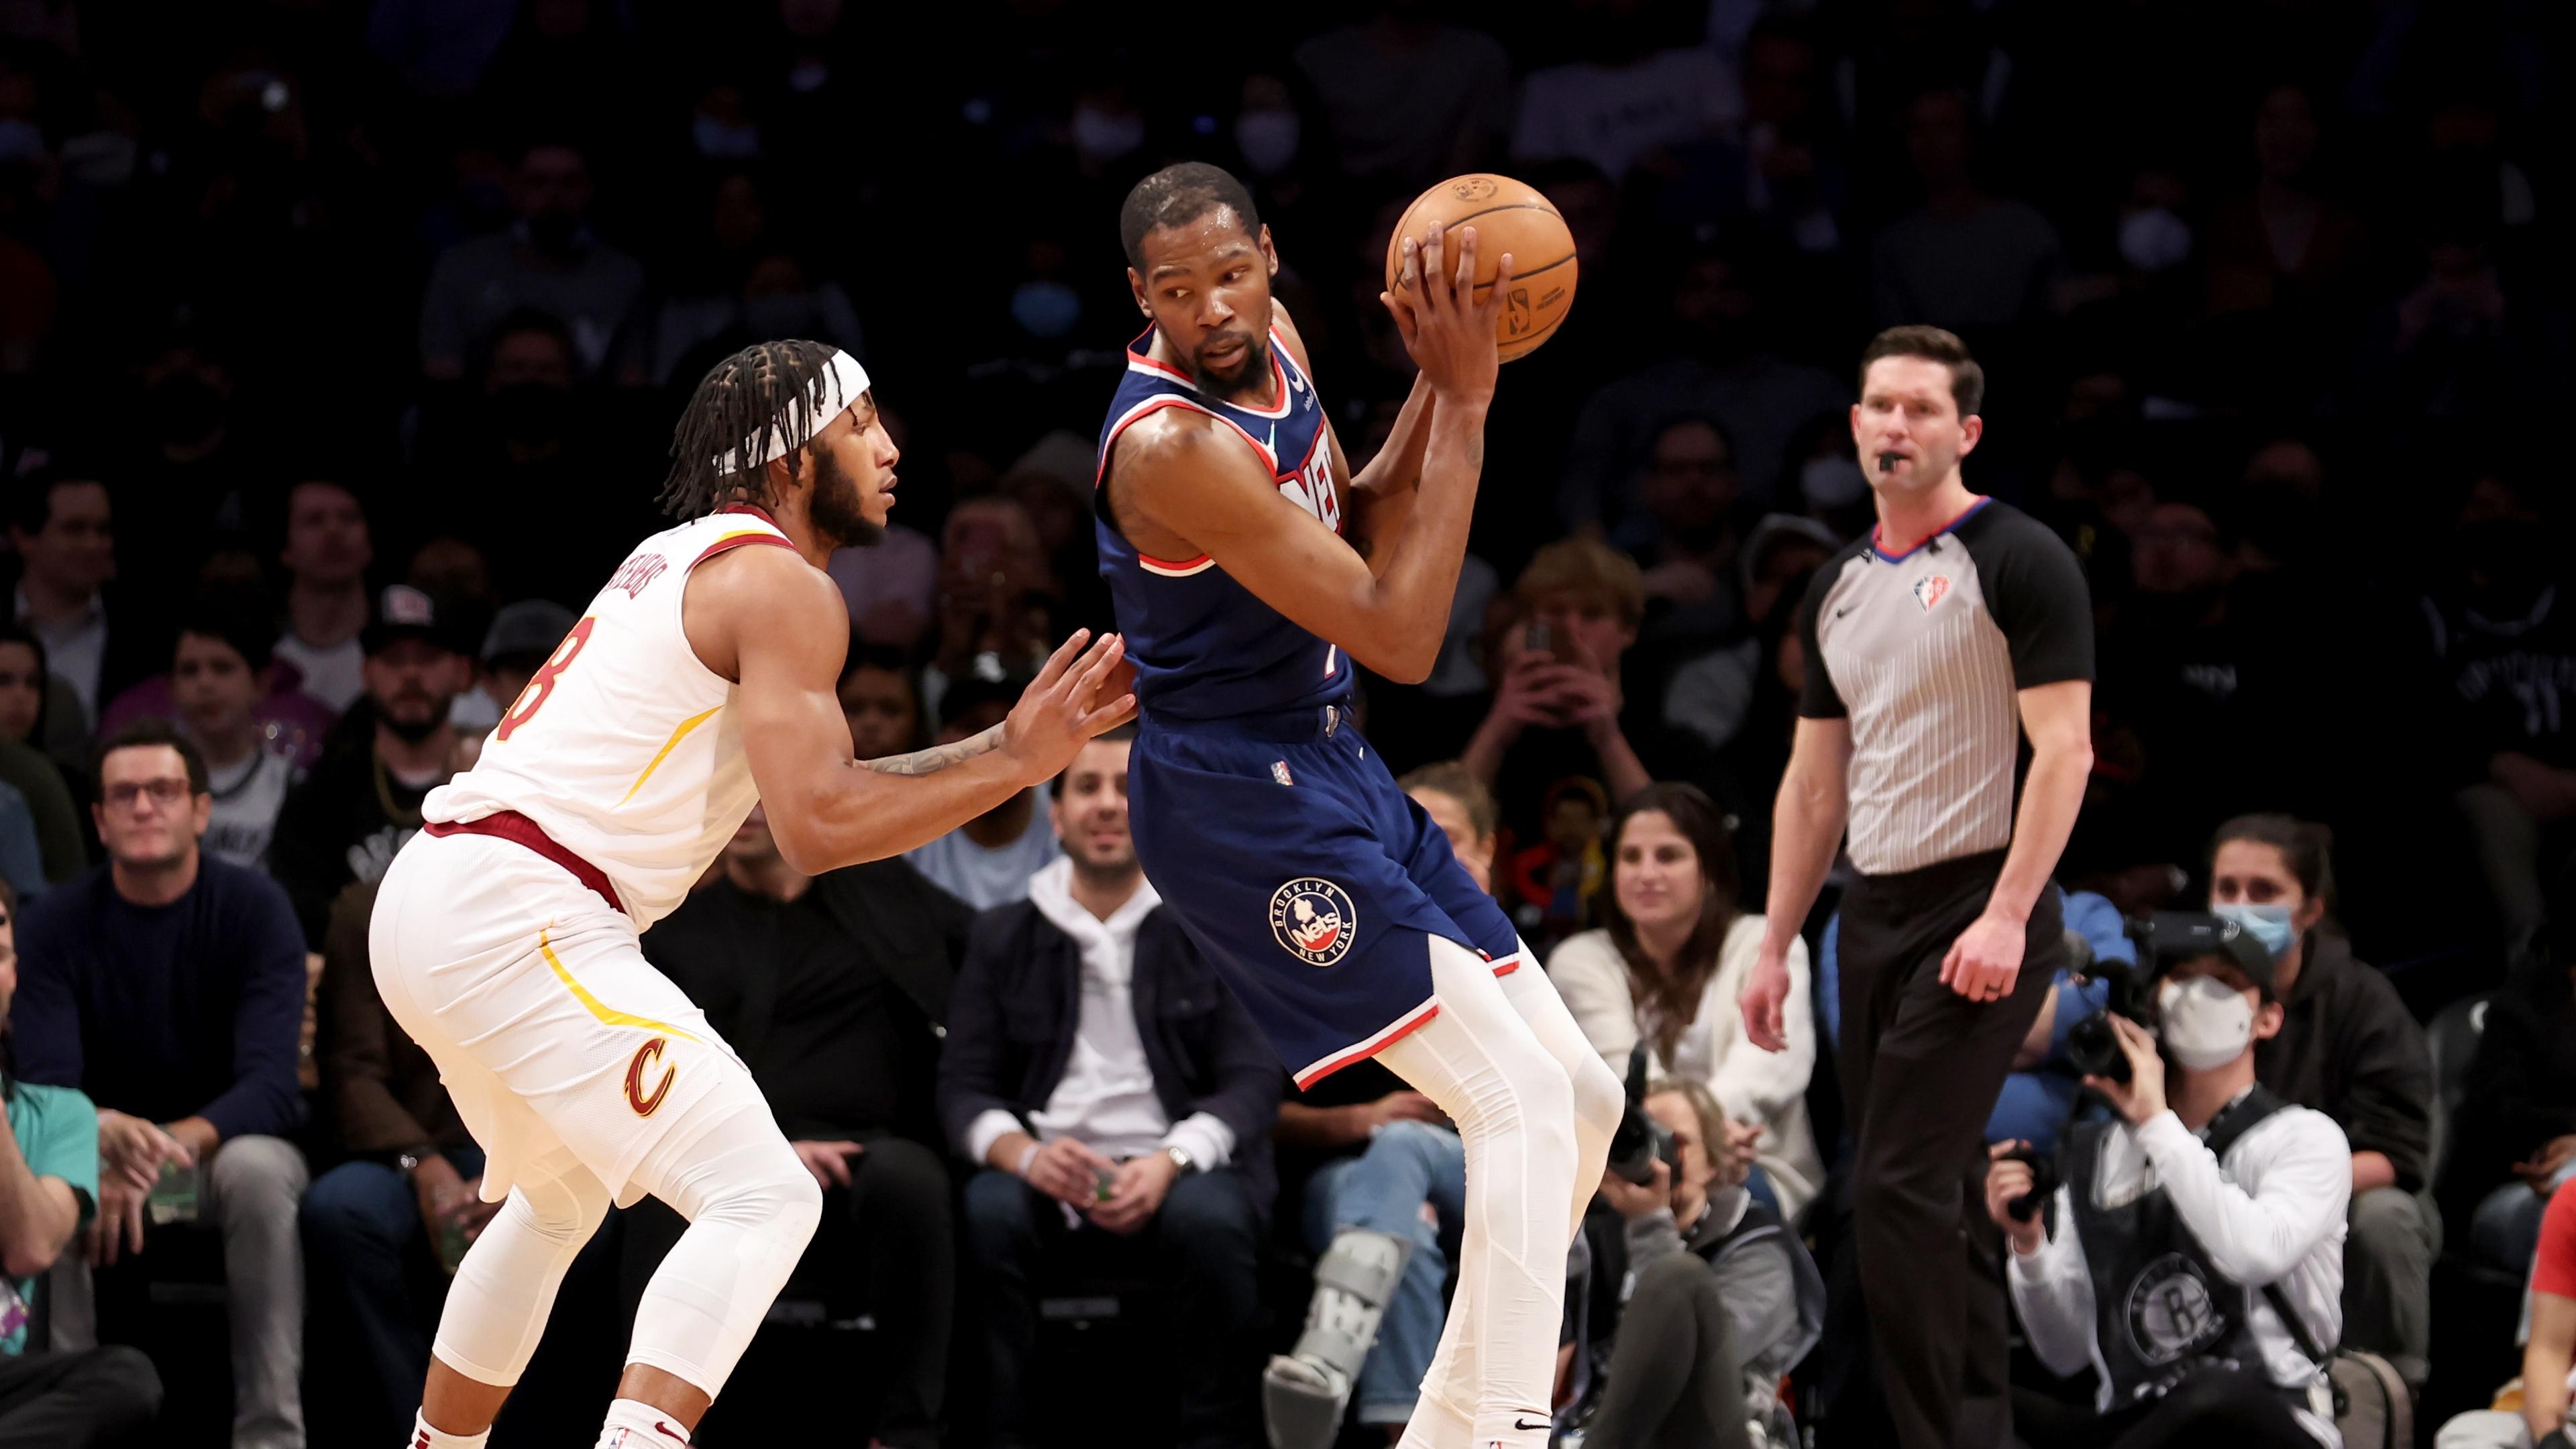 Apr 8, 2022; Brooklyn, New York, USA; Brooklyn Nets forward Kevin Durant (7) controls the ball against Cleveland Cavaliers forward Lamar Stevens (8) during the first quarter at Barclays Center. Mandatory Credit: Brad Penner-USA TODAY Sports / © Brad Penner-USA TODAY Sports